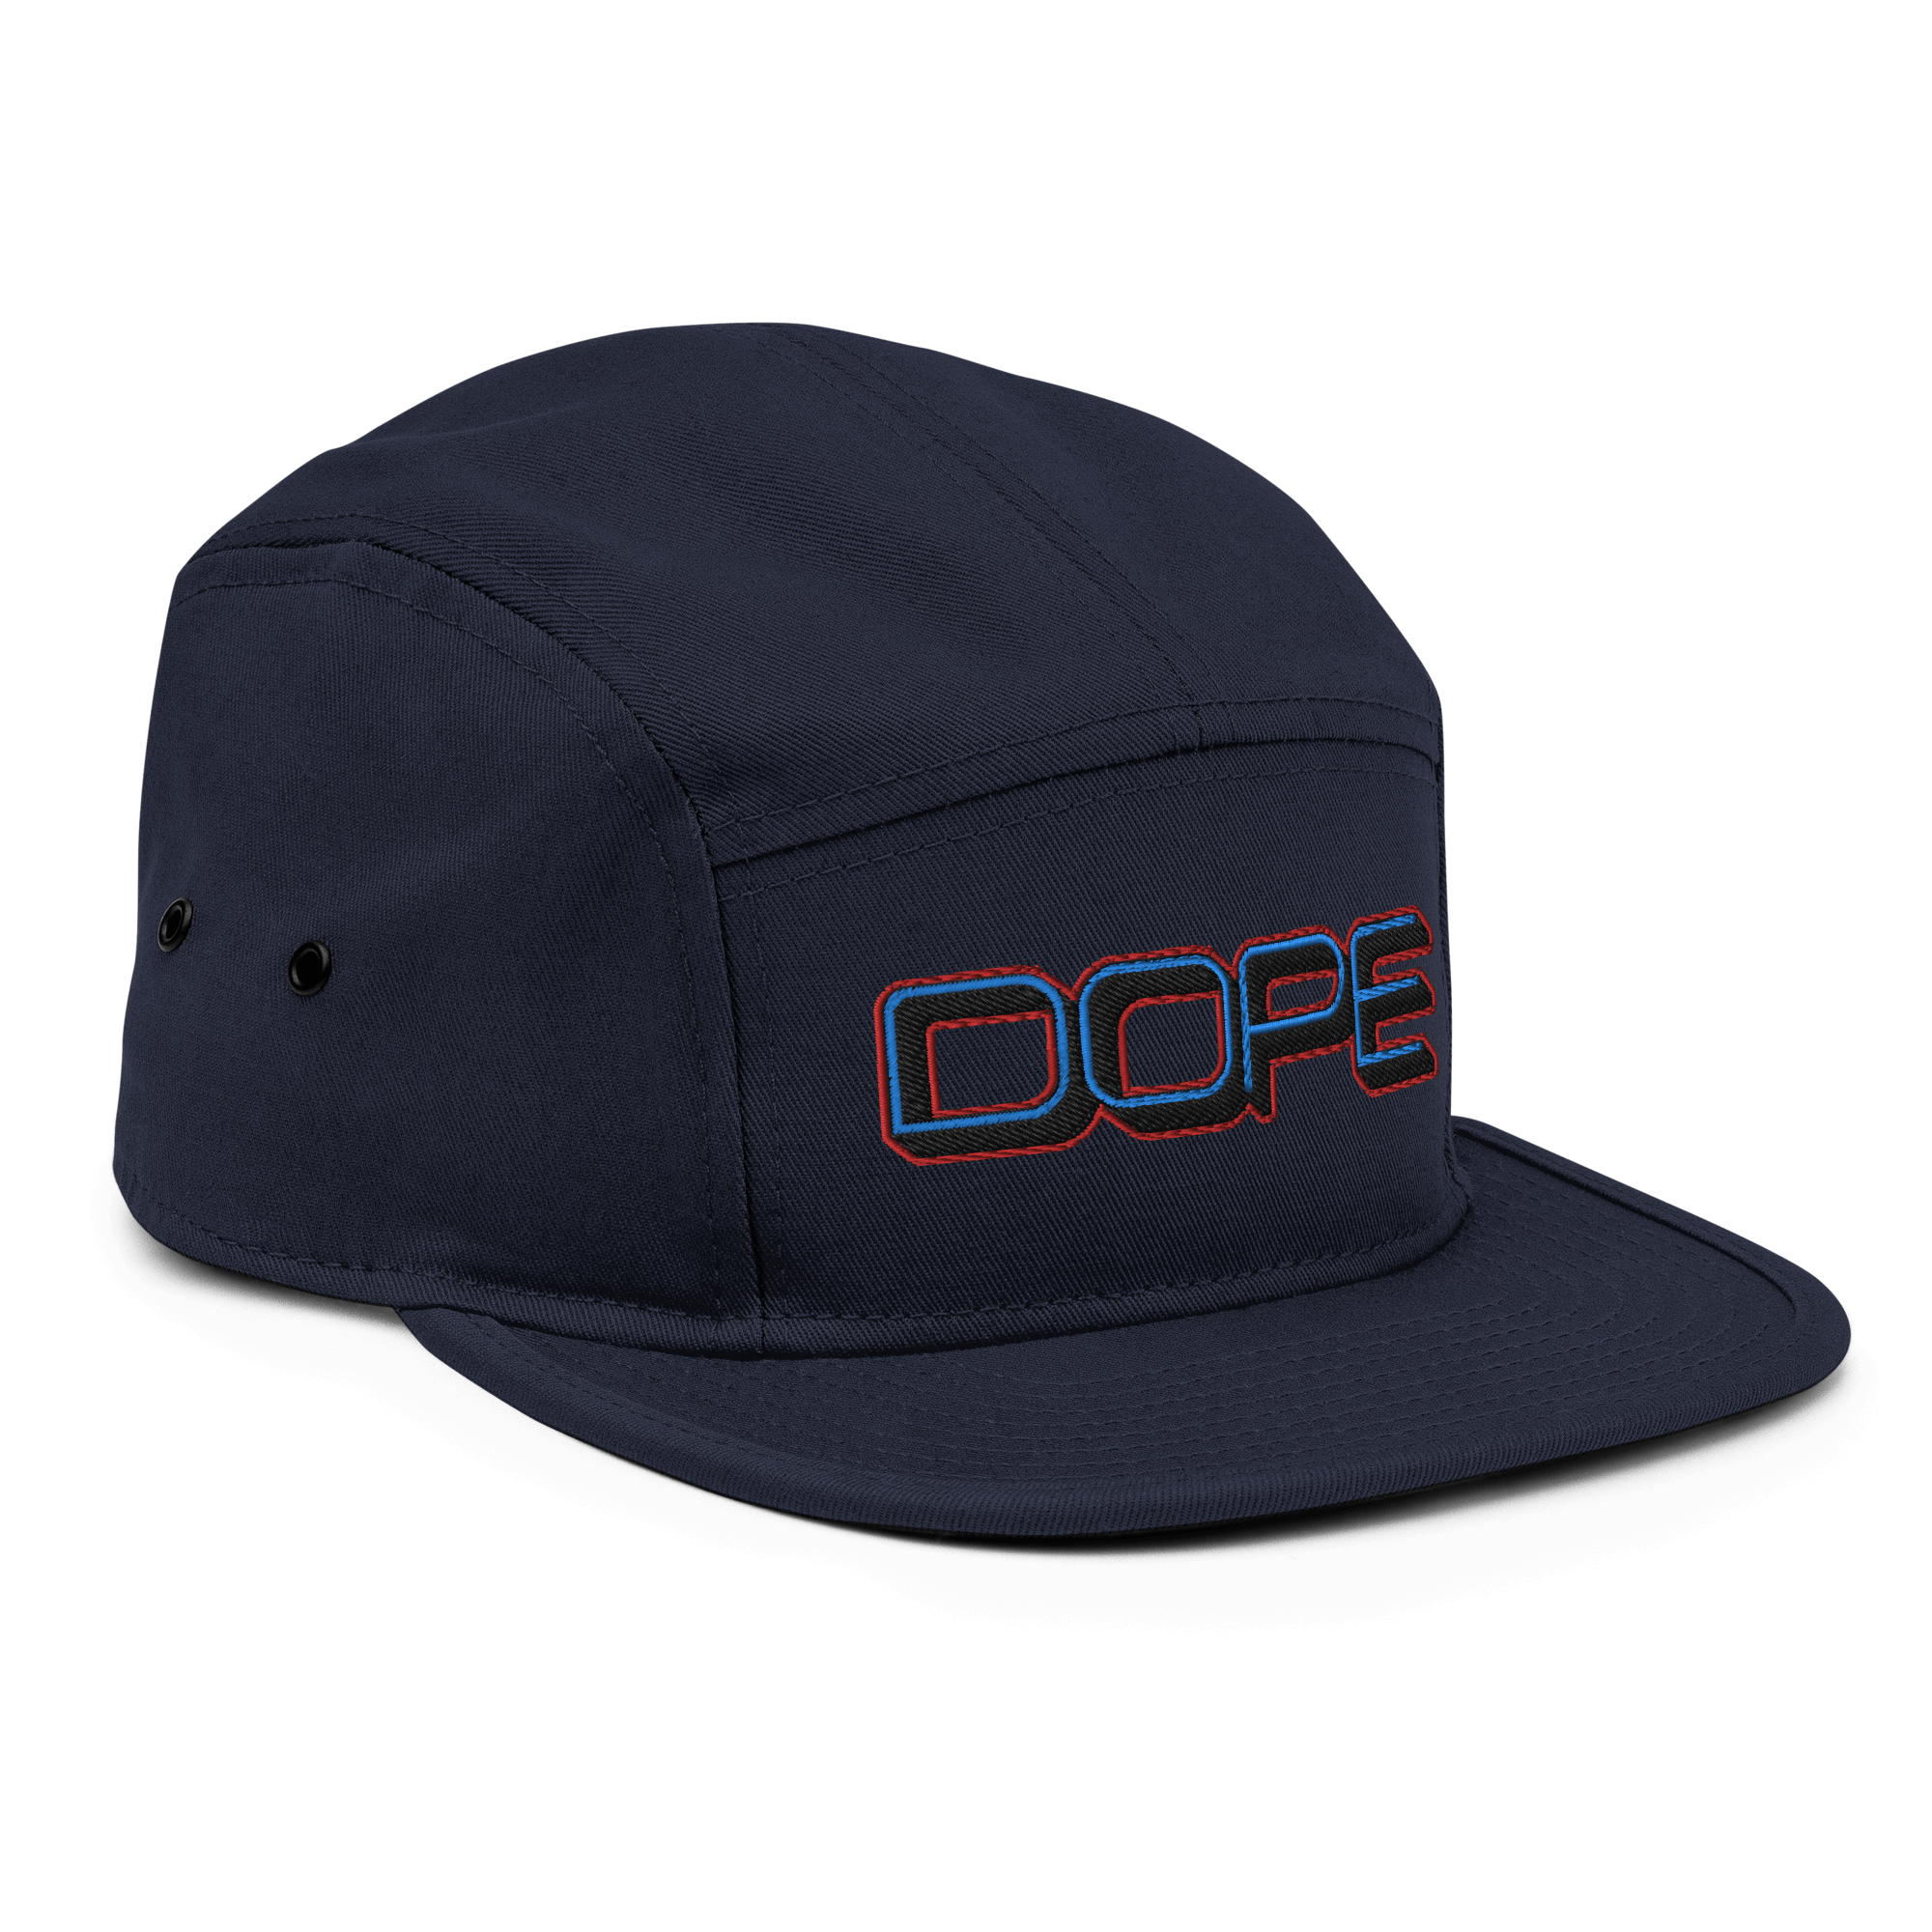 Dope Camper CapElevate your style with the Dope Camper Cap – a personalized touch crafted just for you upon order. While it takes a bit longer to reach you, this on-demand production not only ensures exclusivity but also contributes to reducing overproduc